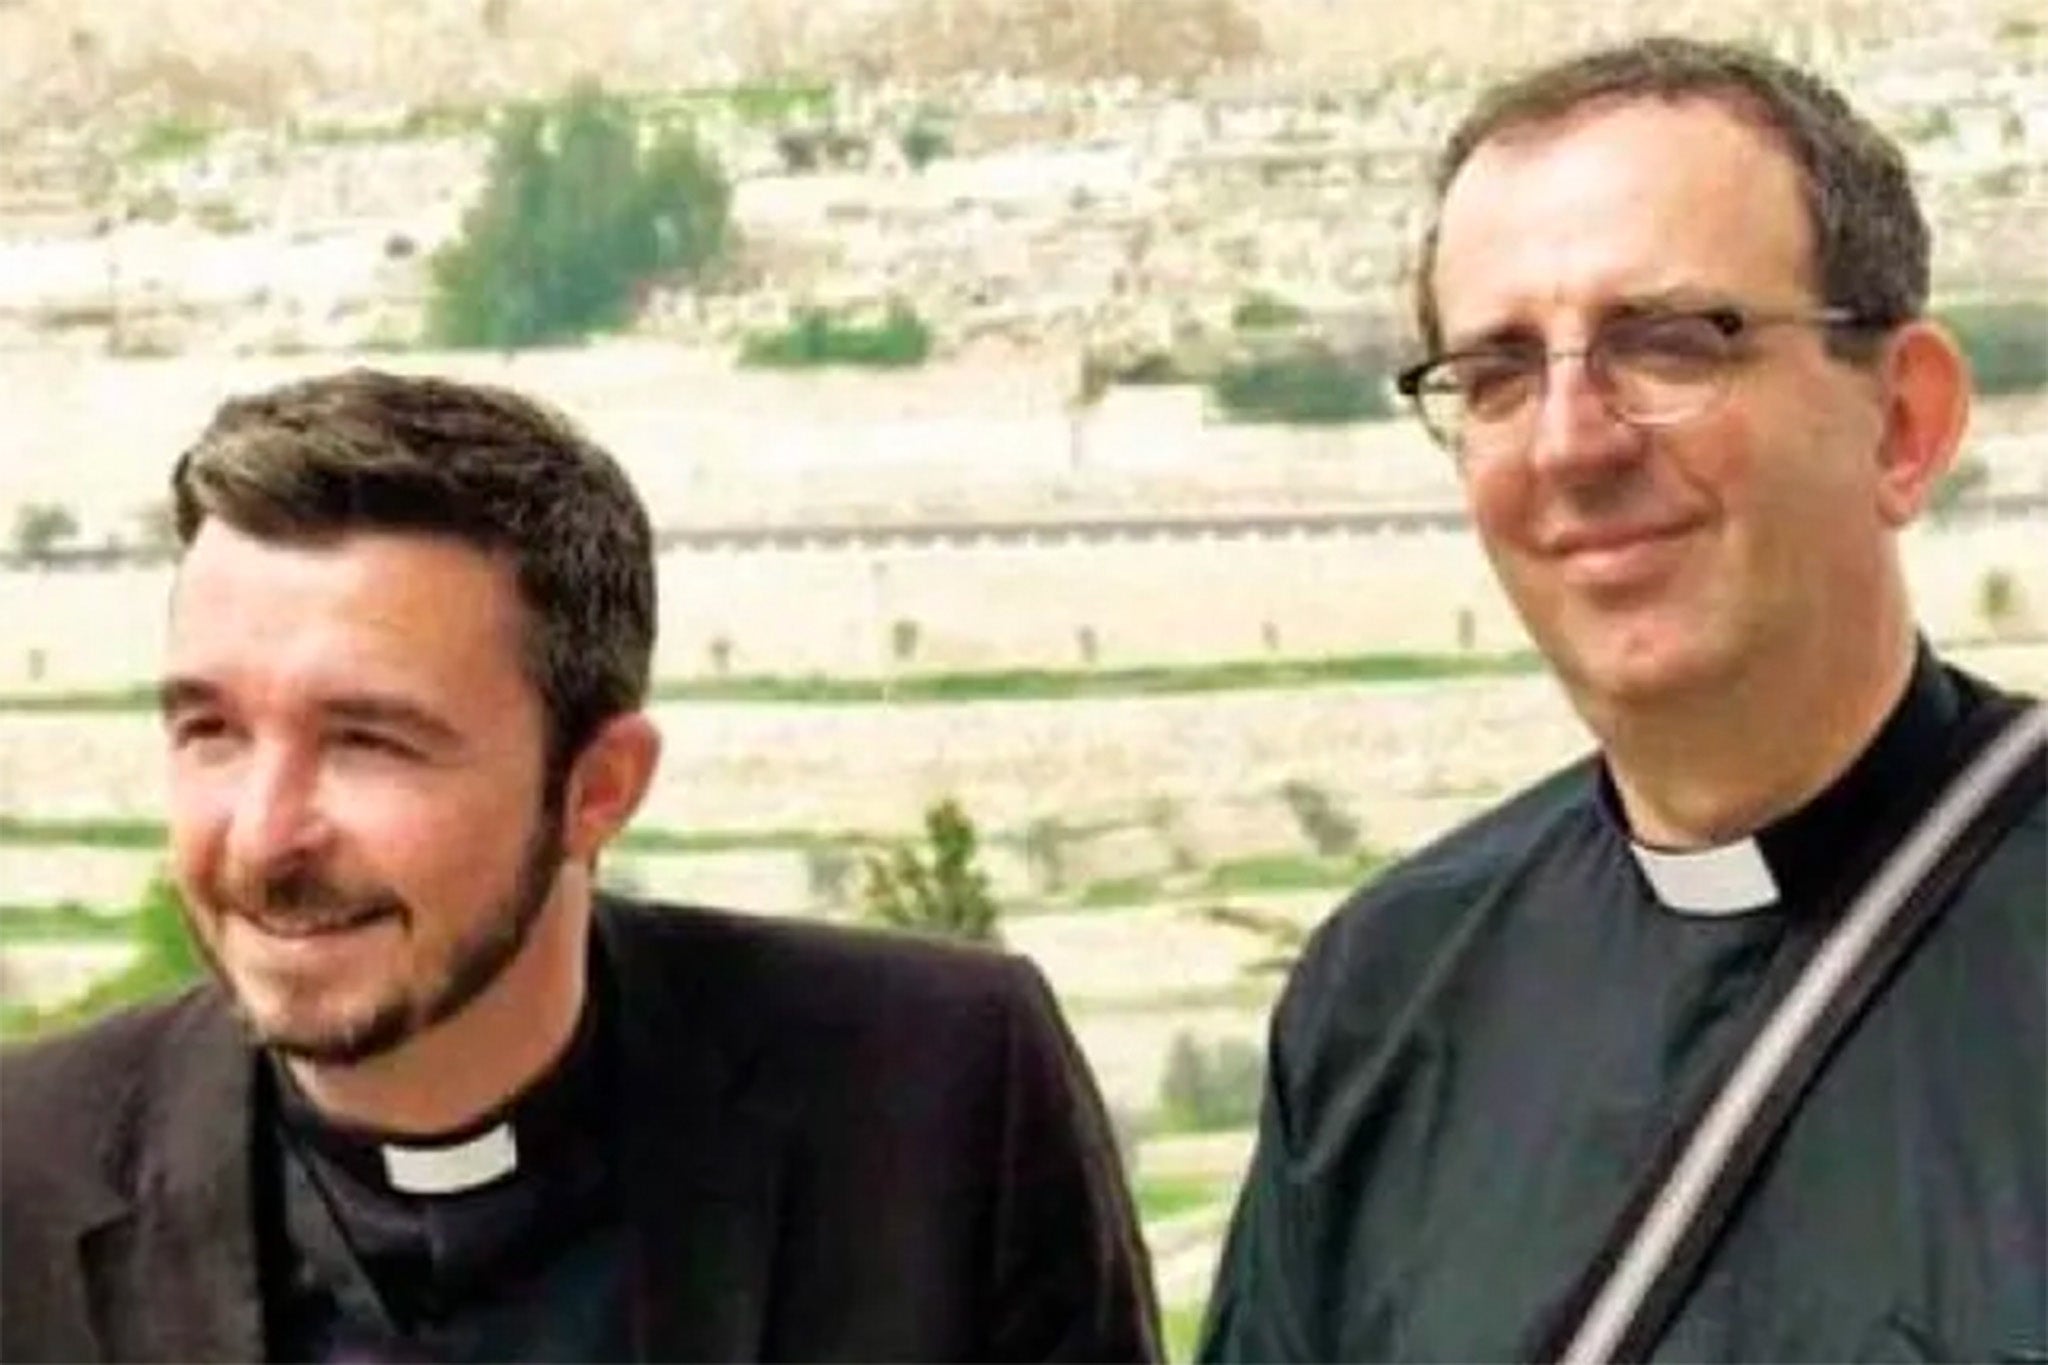 David Coles, left, and Richard Coles were together from 2007 until the former's death in 2019.